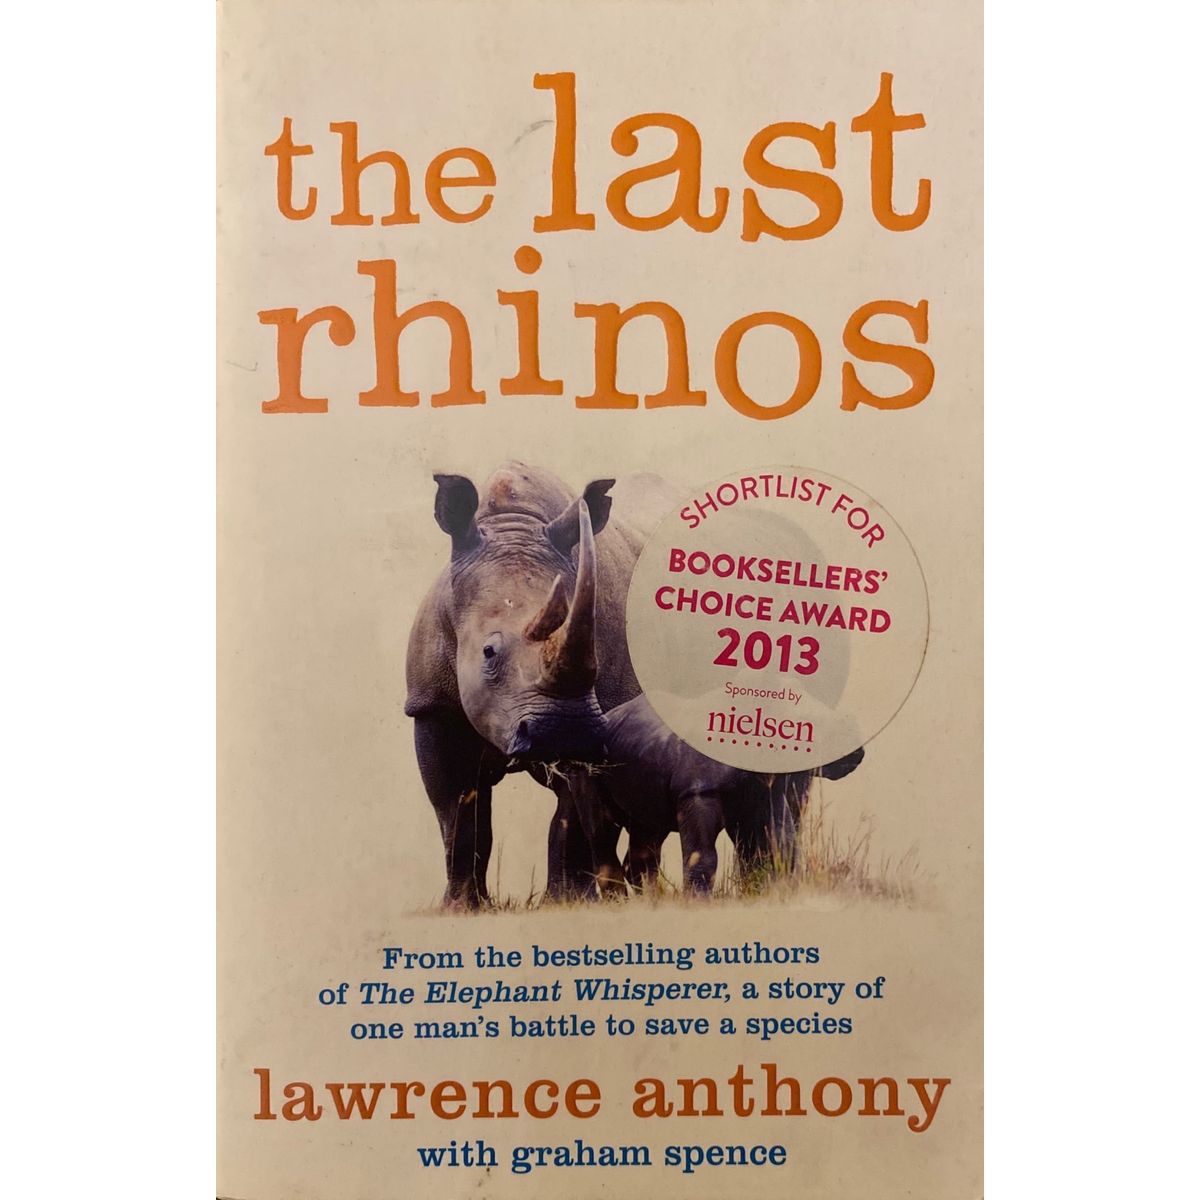 ISBN: 9781447203803 / 1447203801 - The Last Rhinos by Lawrence Anthony & Graham Spence [2013]